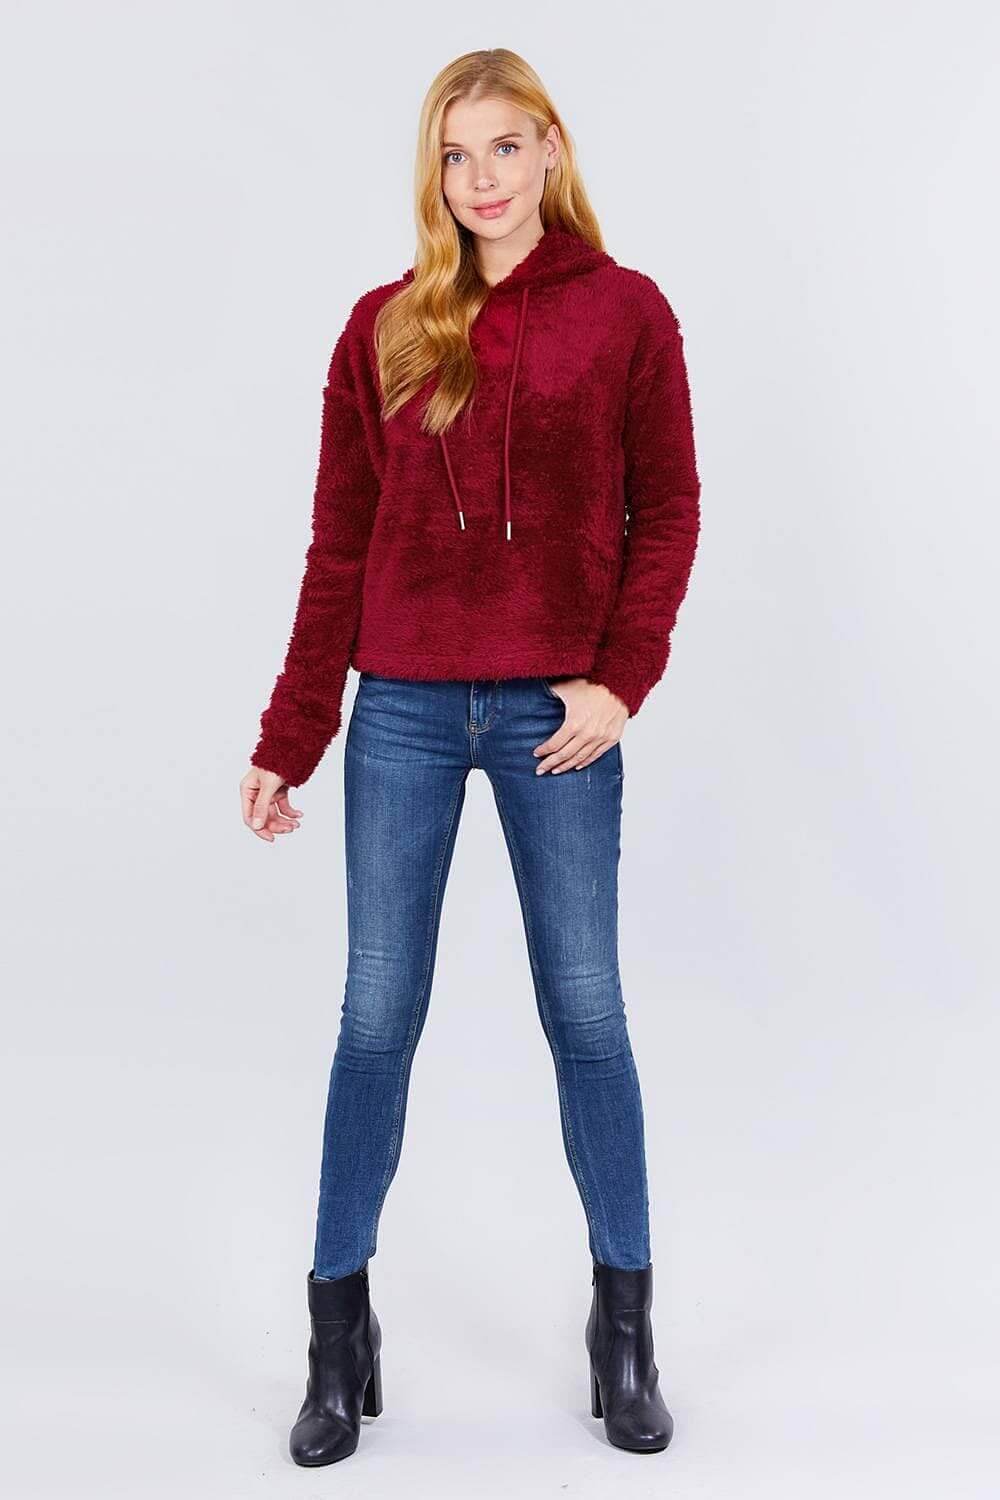 Burgundy Long Sleeve Faux Fur Sweater - Shopping Therapy Sweater